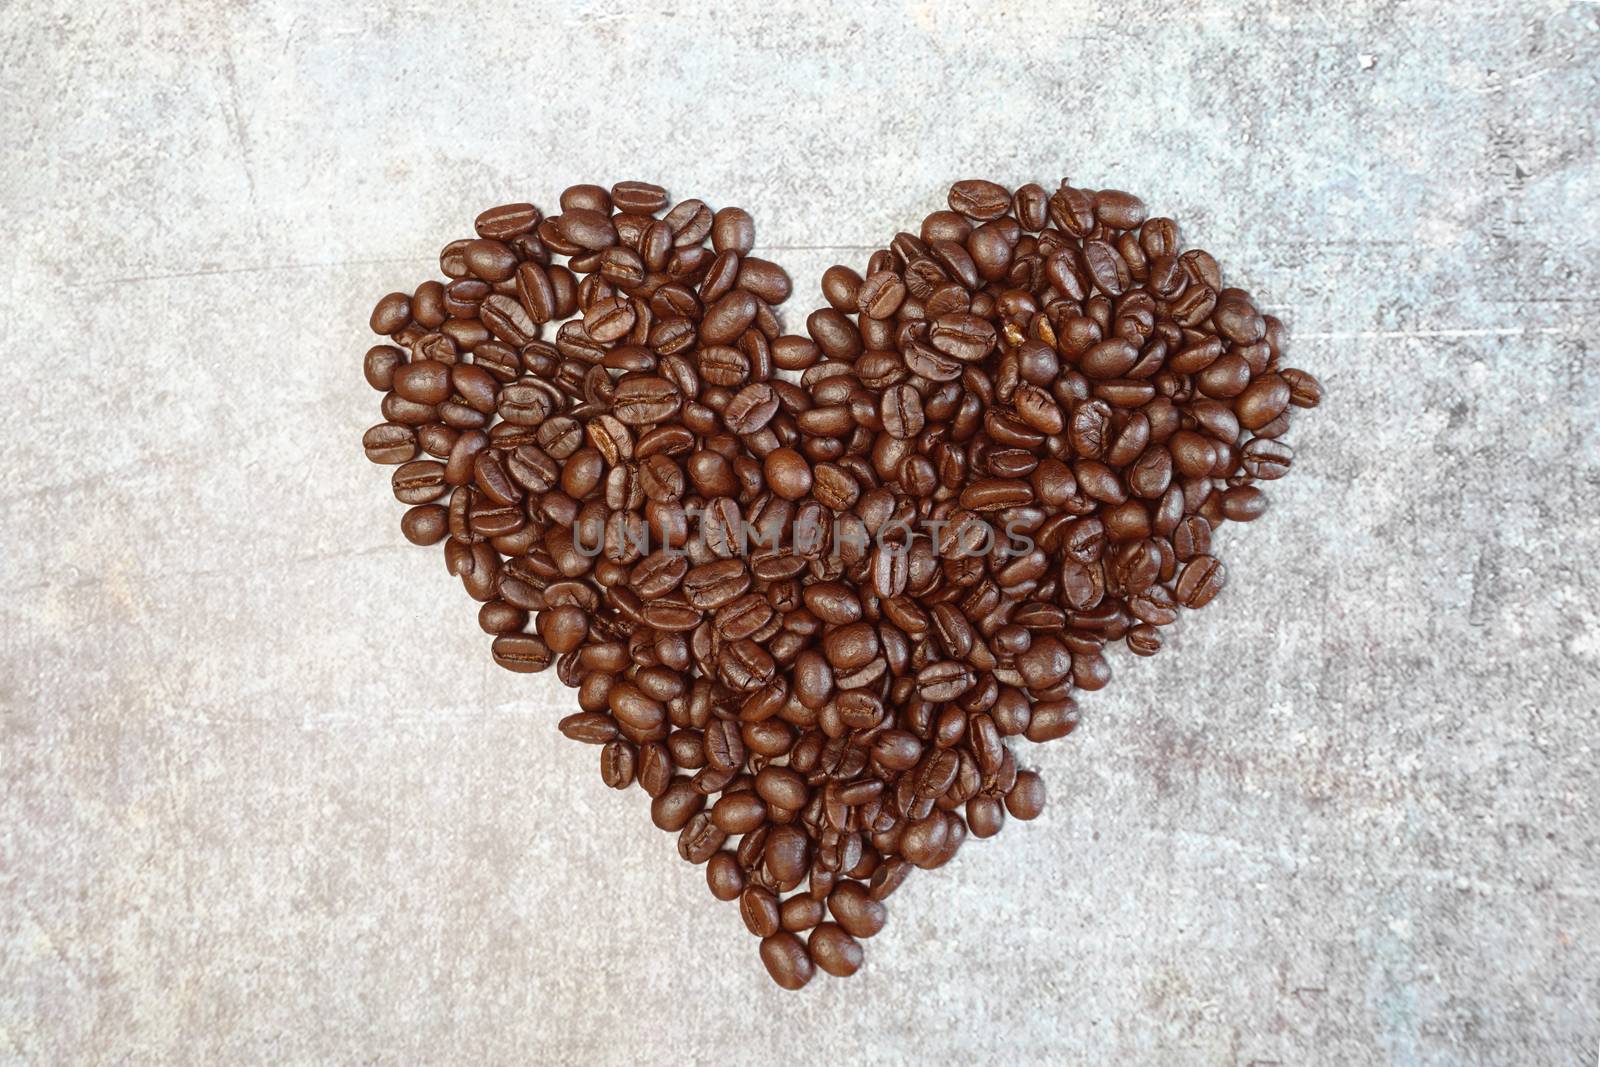 Roasted coffee beans in heart shape. by Urvashi-A